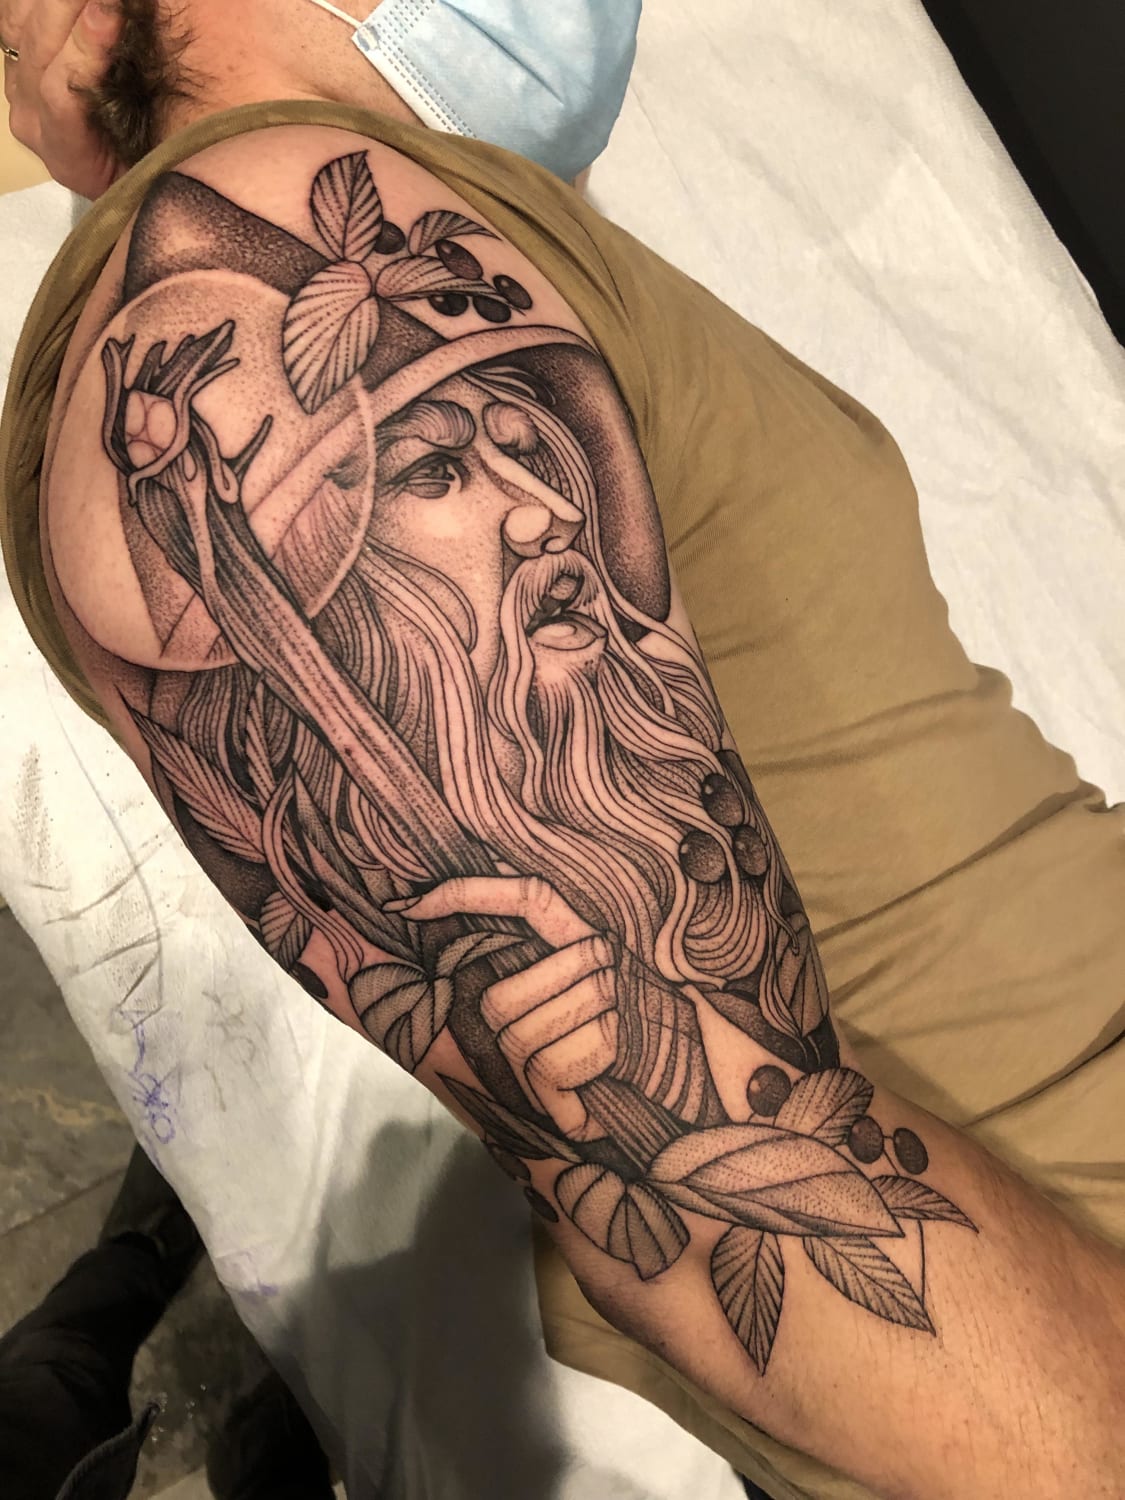 The start of my LOTR sleeve. My first tattoo. Done in one sitting by Jeremy Lamos at High Tides in Saint John, NB, Canada!